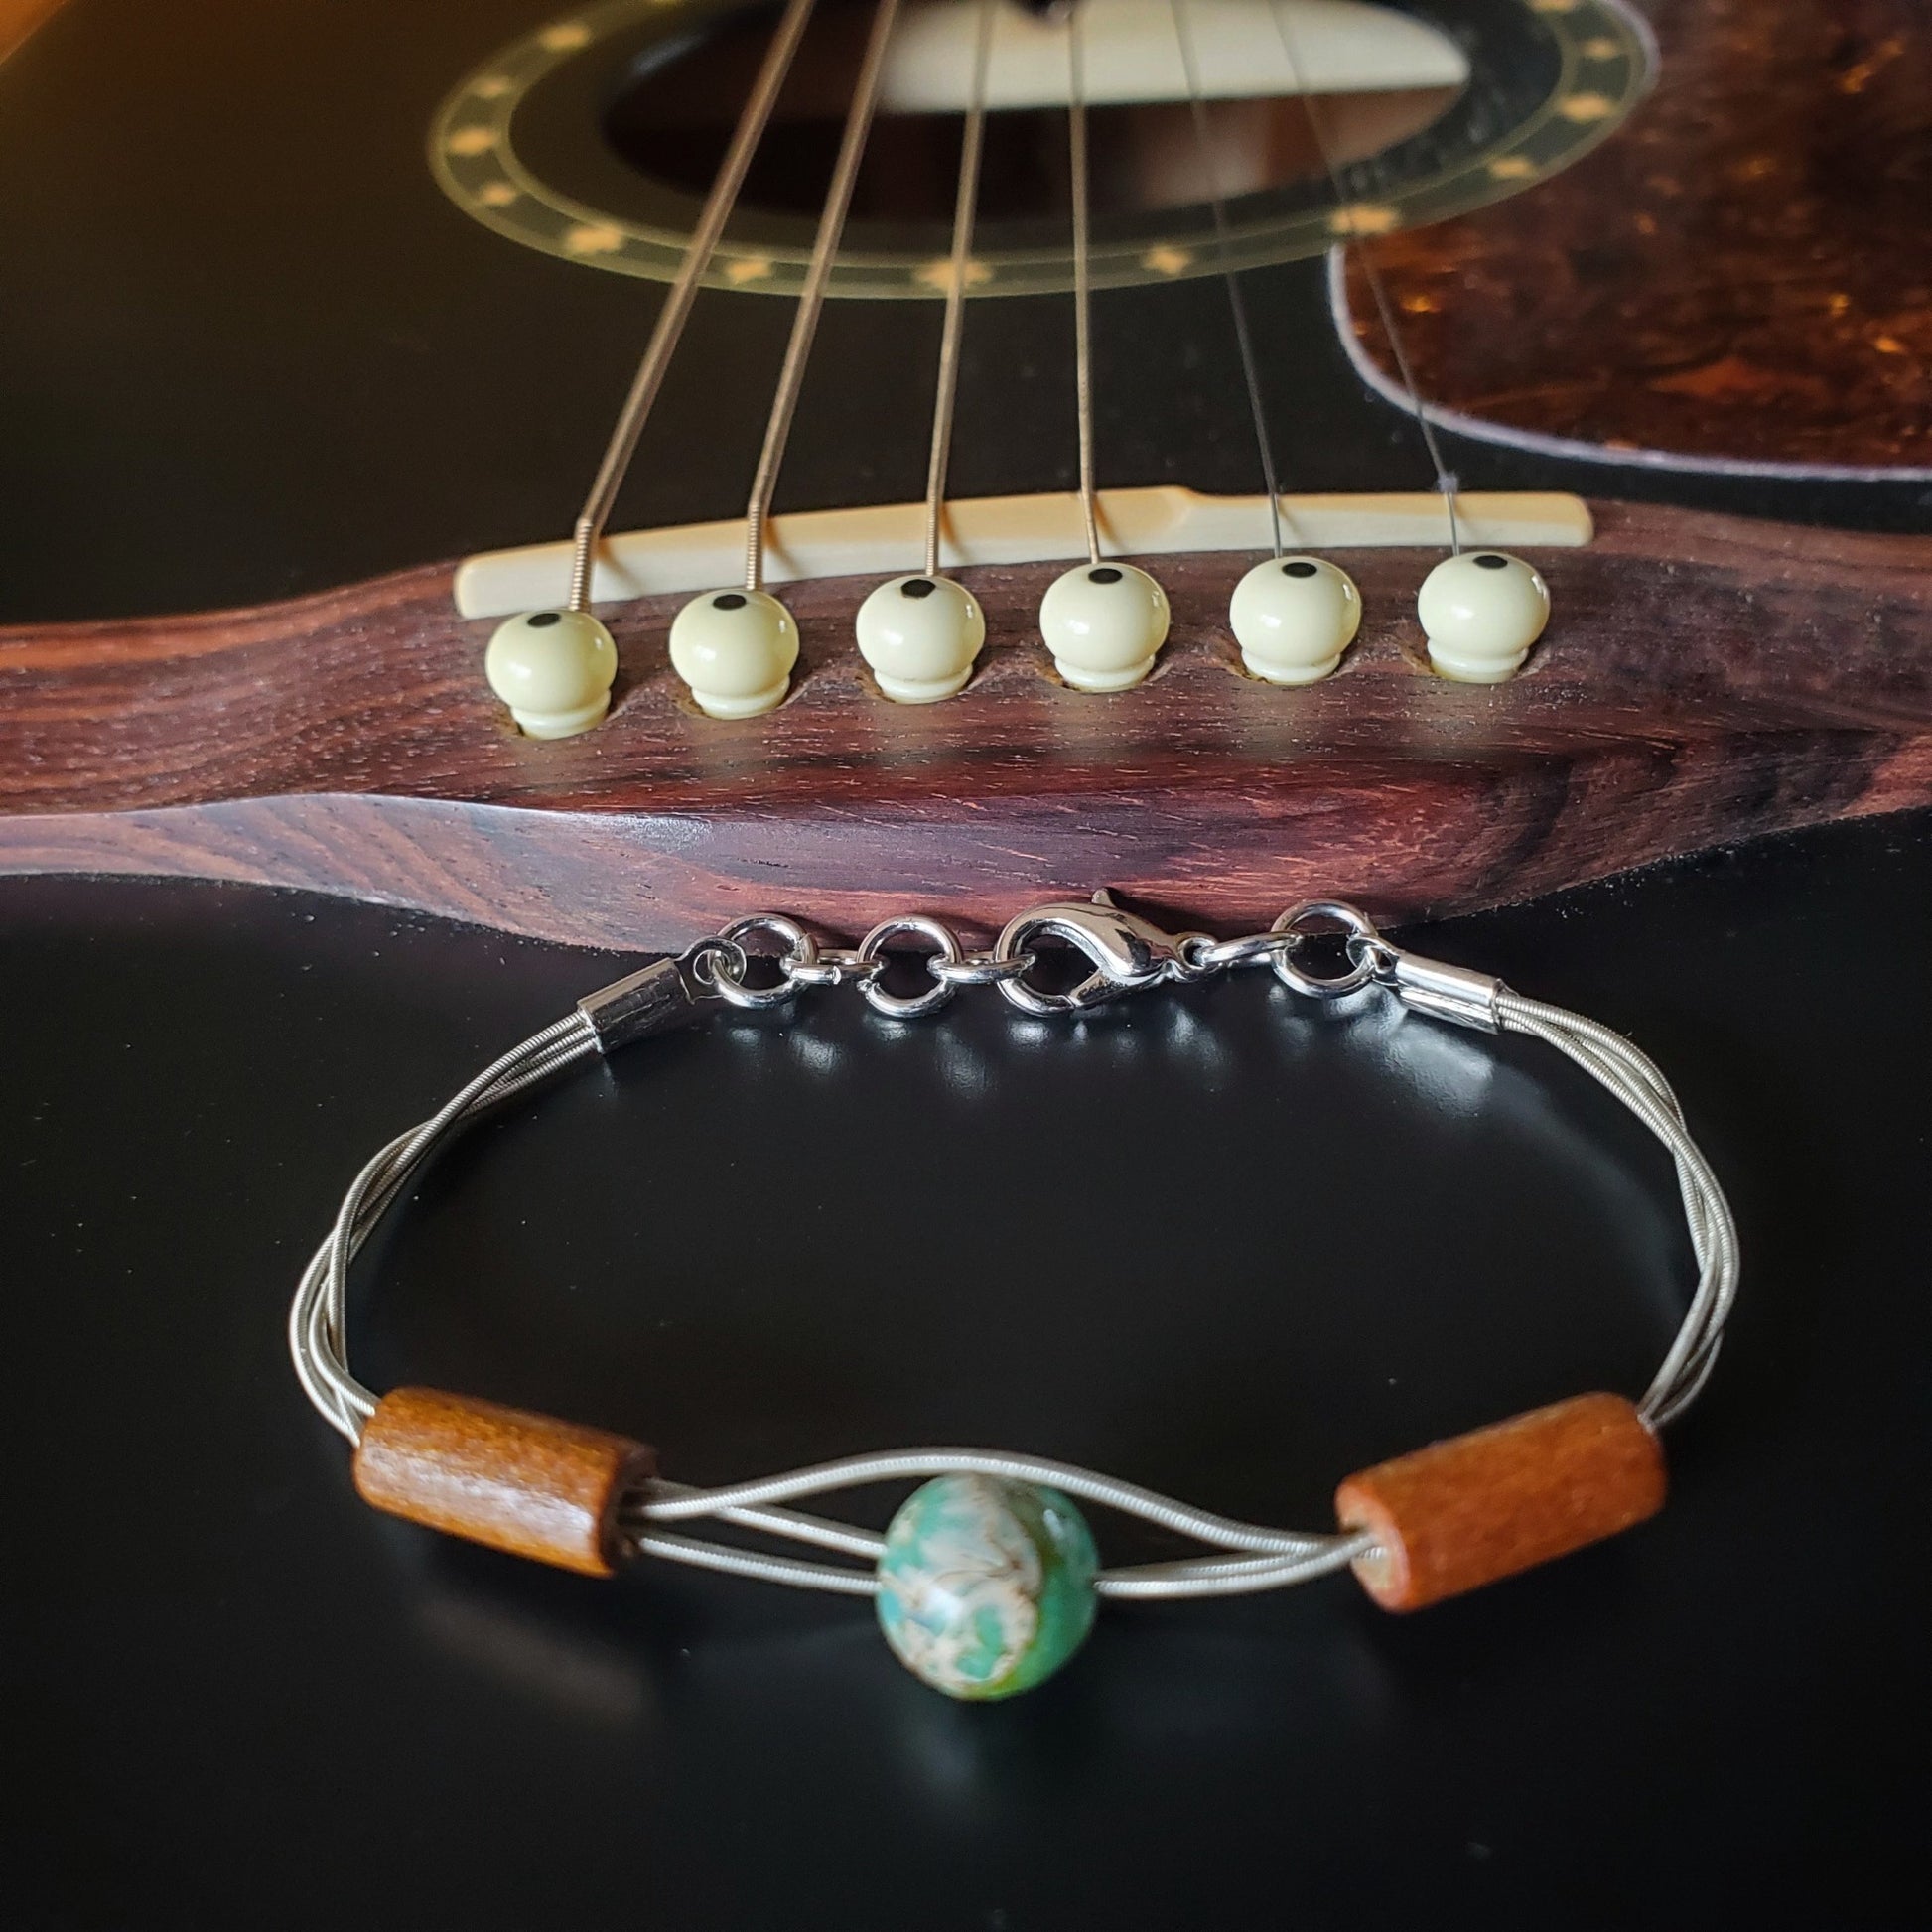 clasp style bracelet made from an upcycled guitar string on which there are two wood bead on either side of a green and gray round bead - the bracelet is in front of the bridge of a black guitar